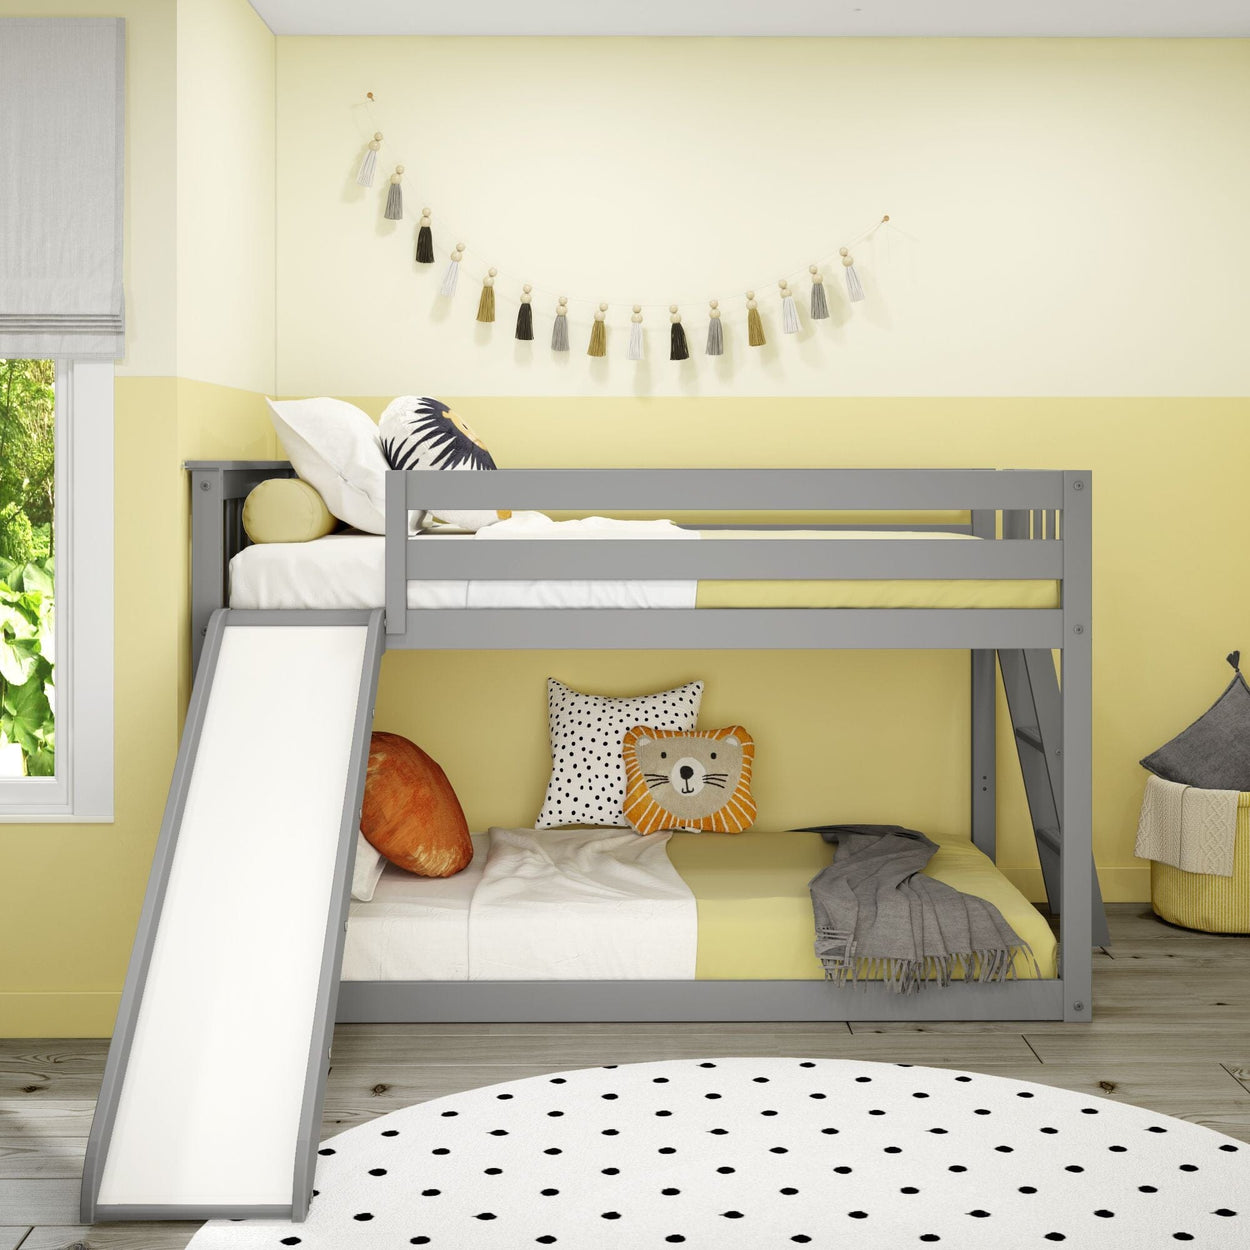 185321-121 : Bunk Beds Twin over Twin Low Bunk Bed with Ladder on End and Slide, Grey